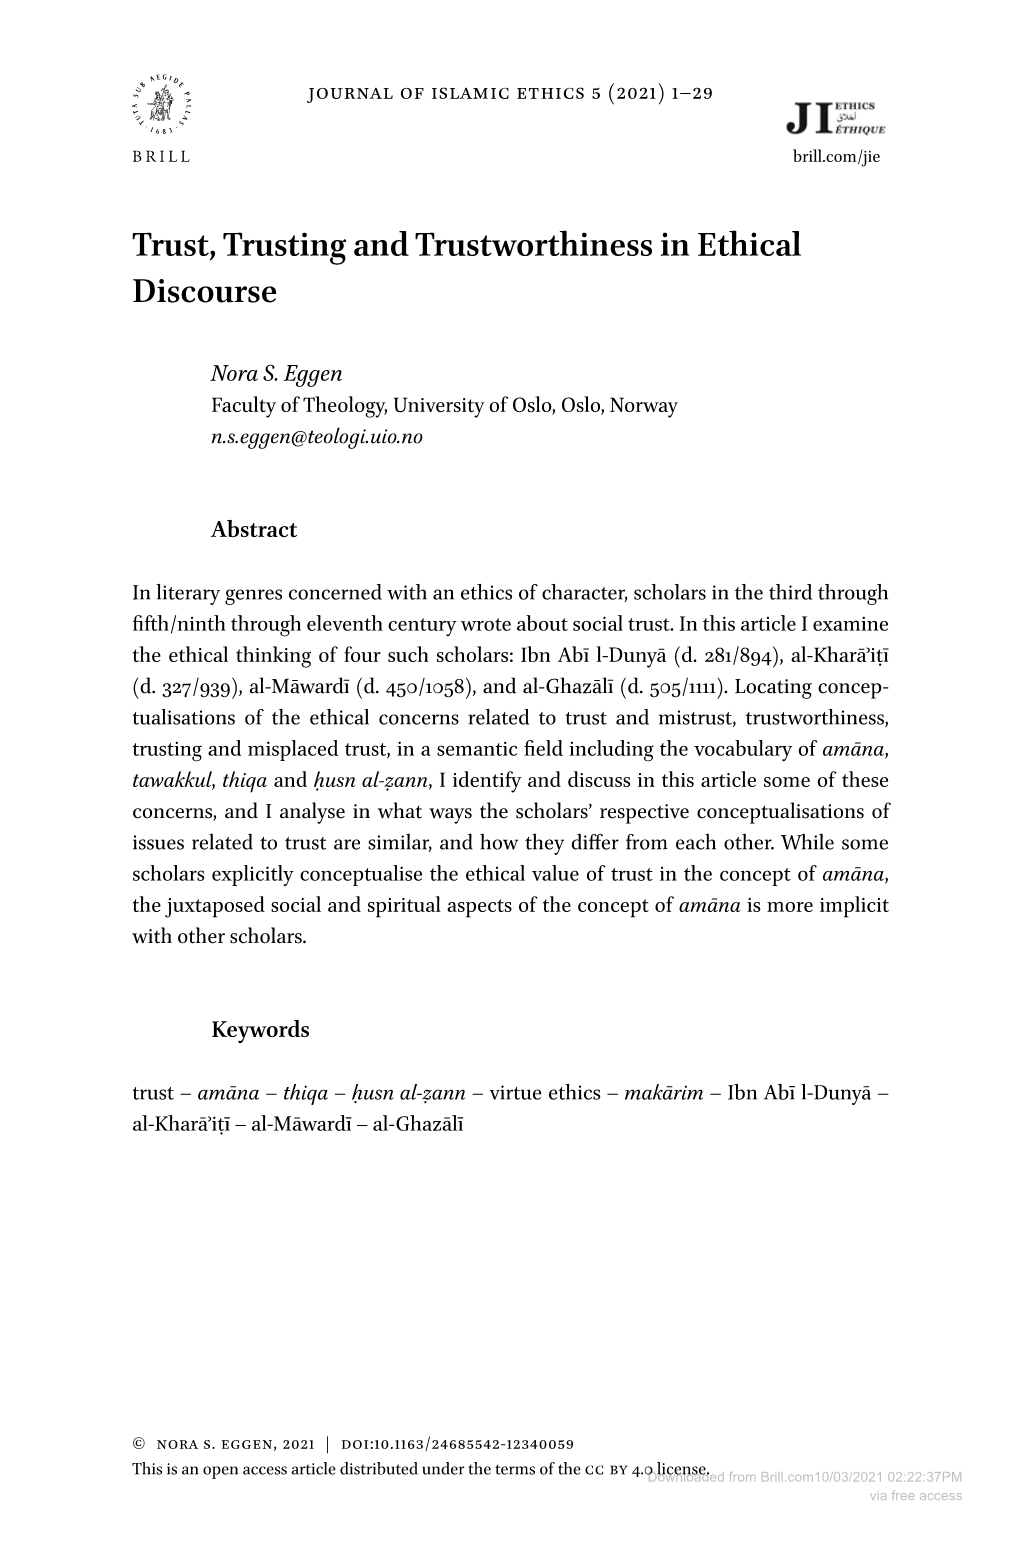 Trust, Trusting and Trustworthiness in Ethical Discourse